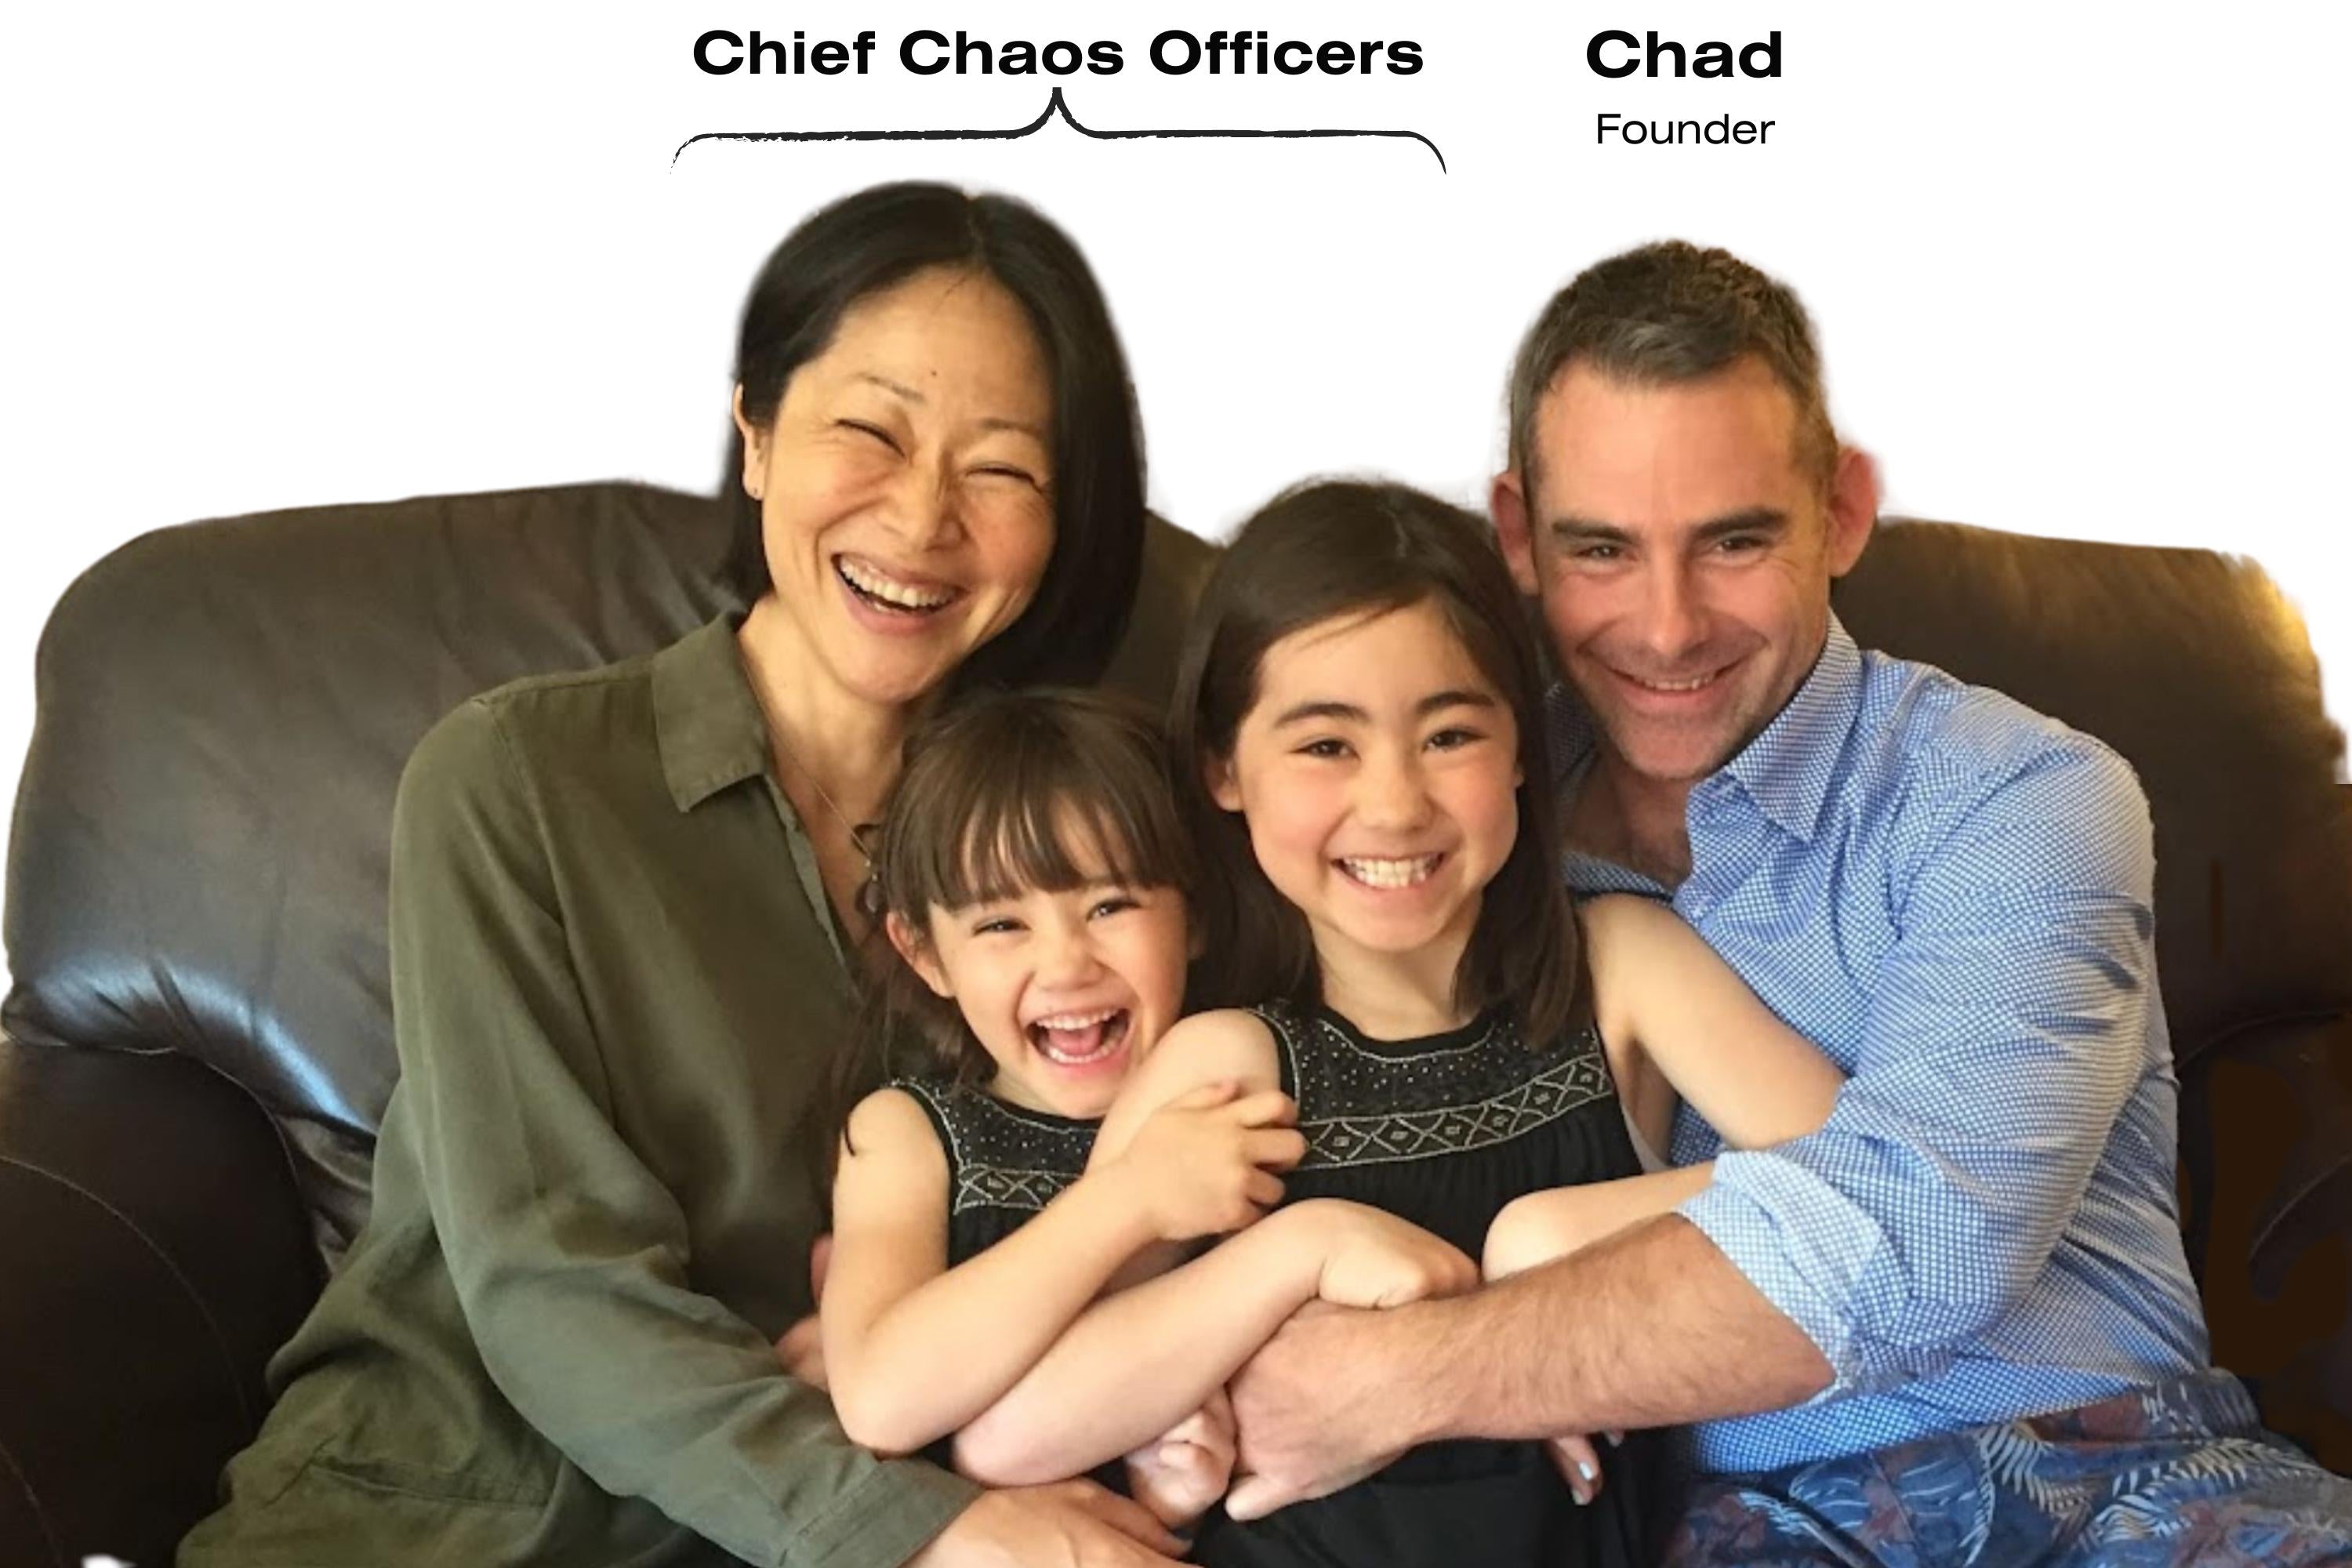 Greenleaf founder Chad with the Chief Chaos Officers